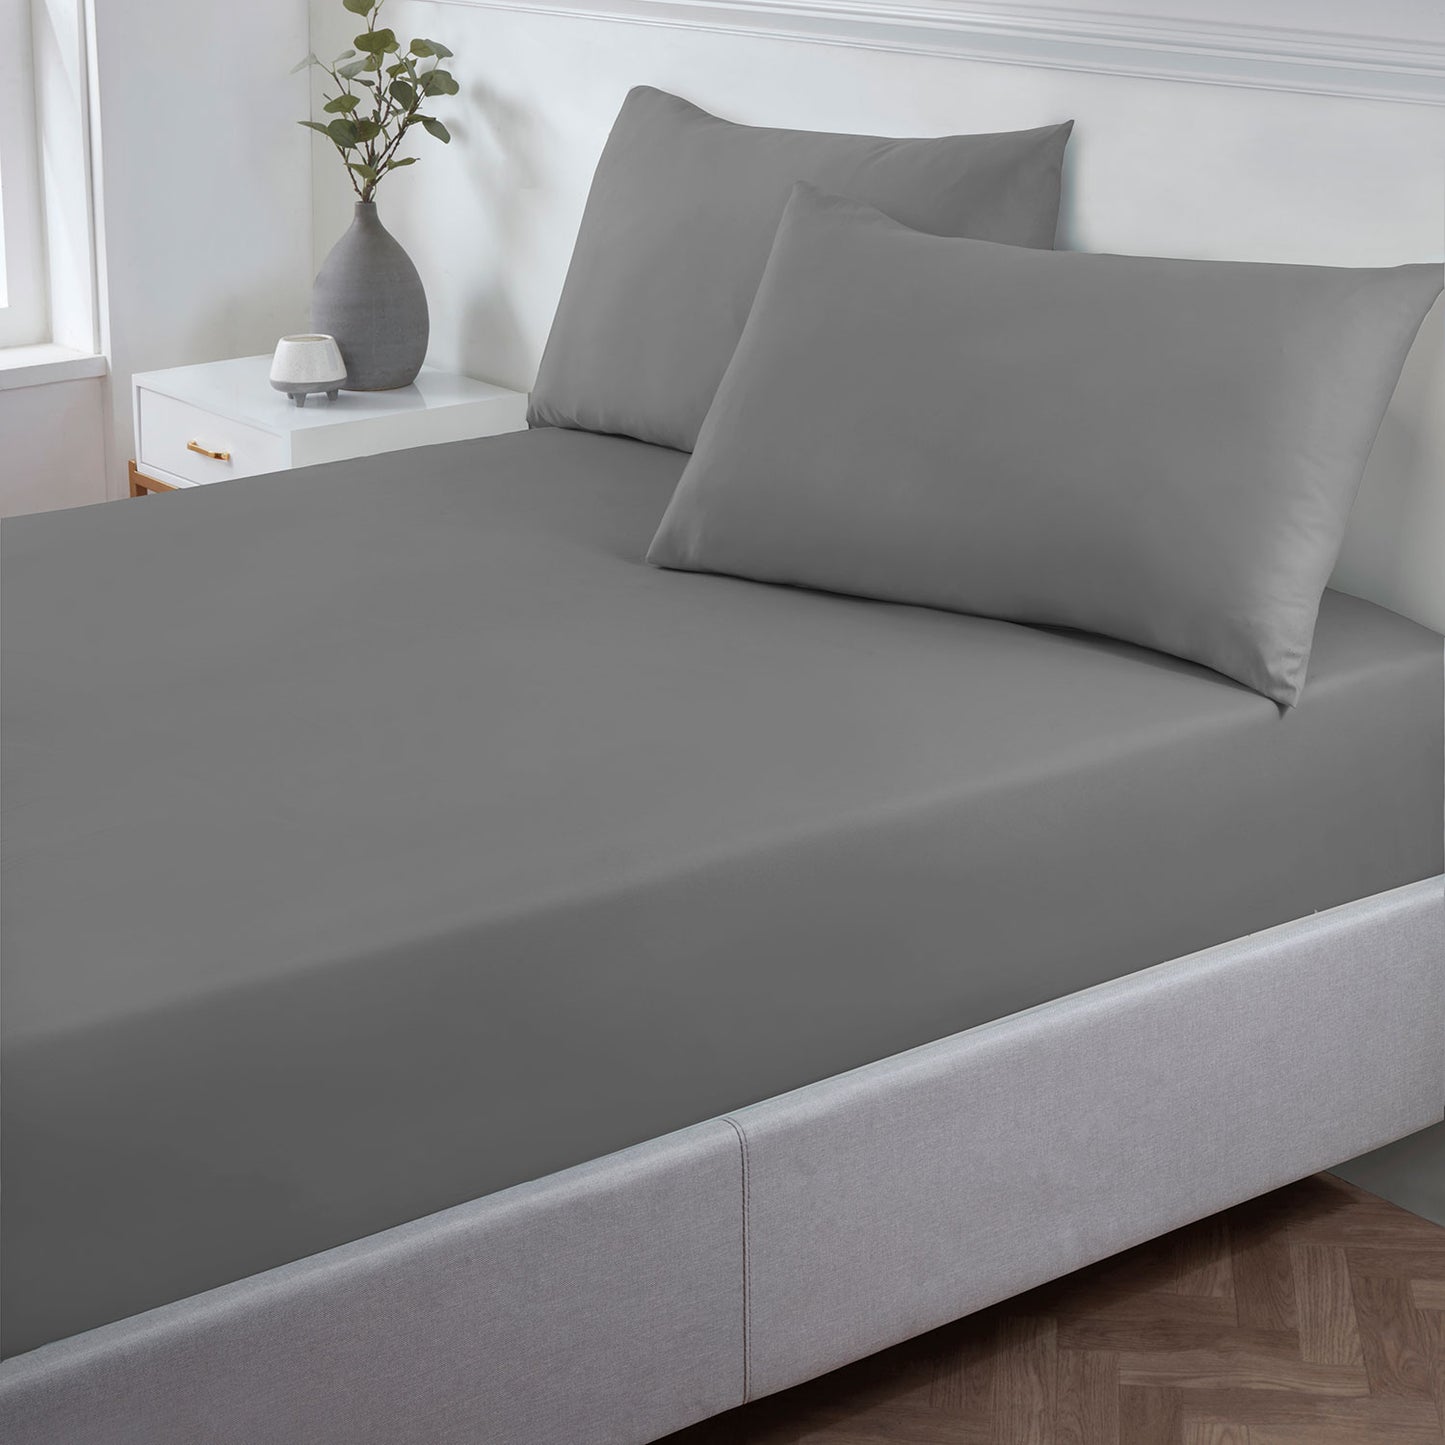 Charcoal Grey Super Soft Easycare Standard (25cm) Fitted Sheet